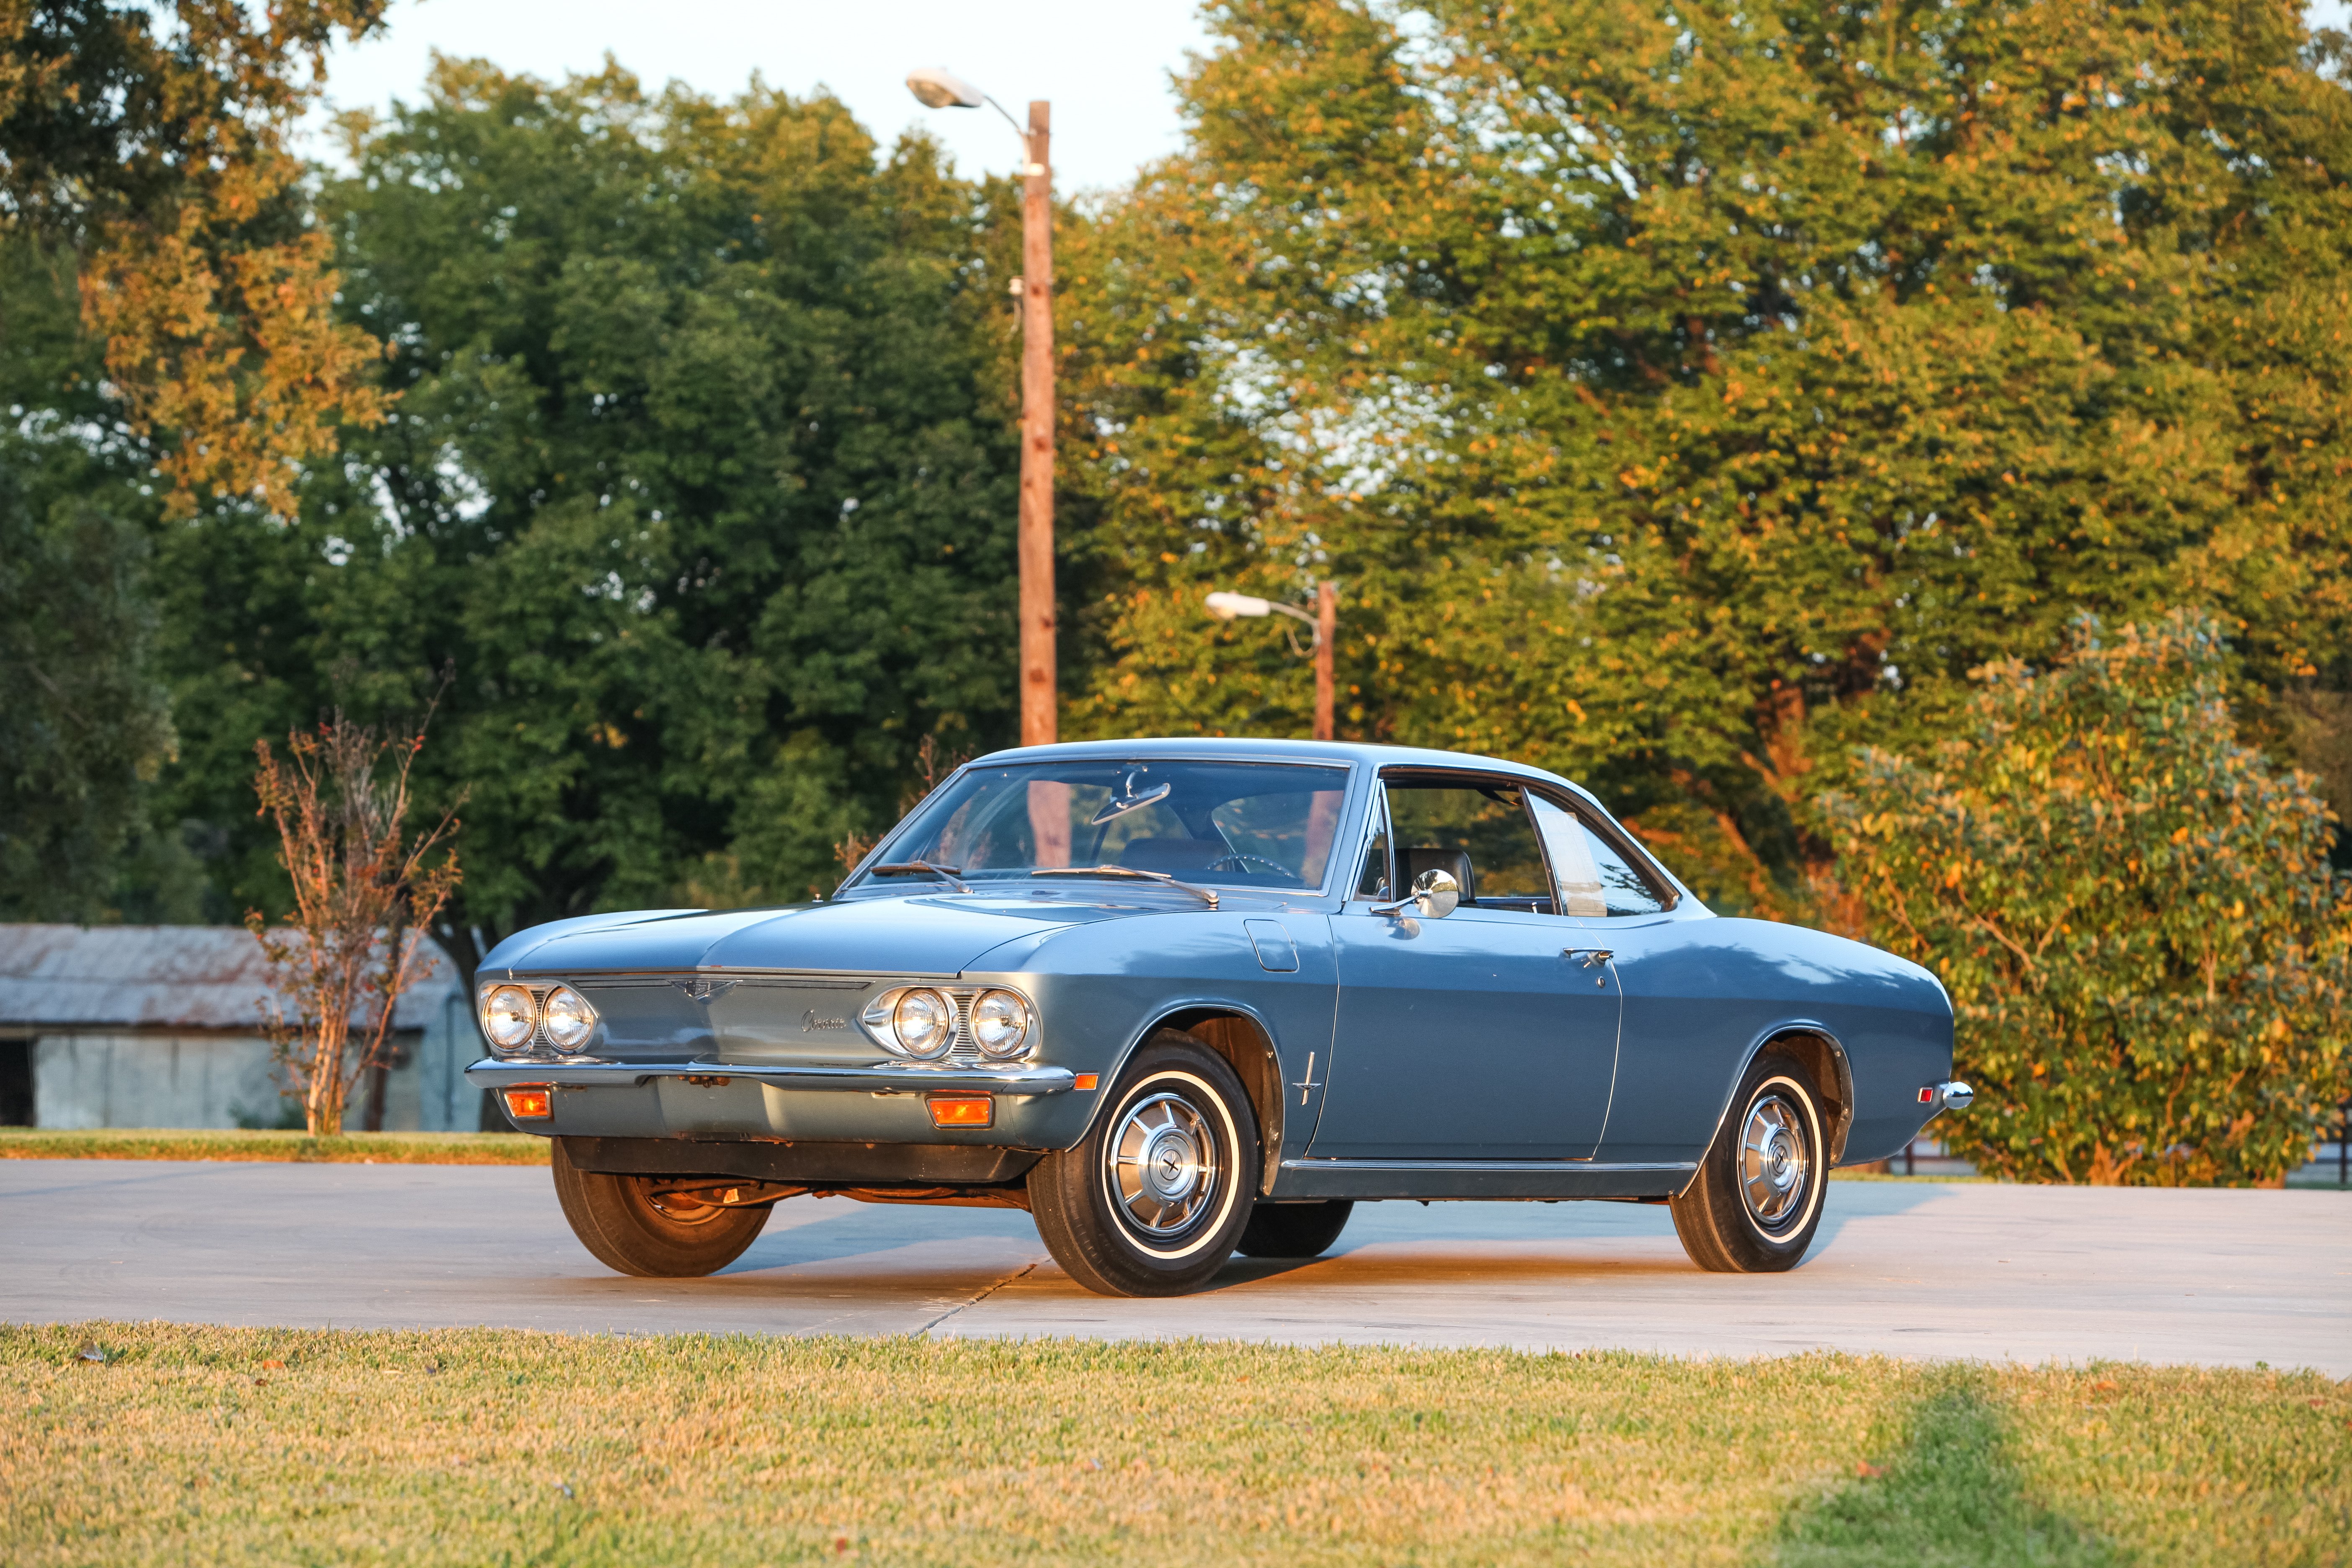 1969, Chevrolet, Corvair, Monza, Coupe, Compact, Classic, Usa, D, 5616x3744 01 Wallpaper